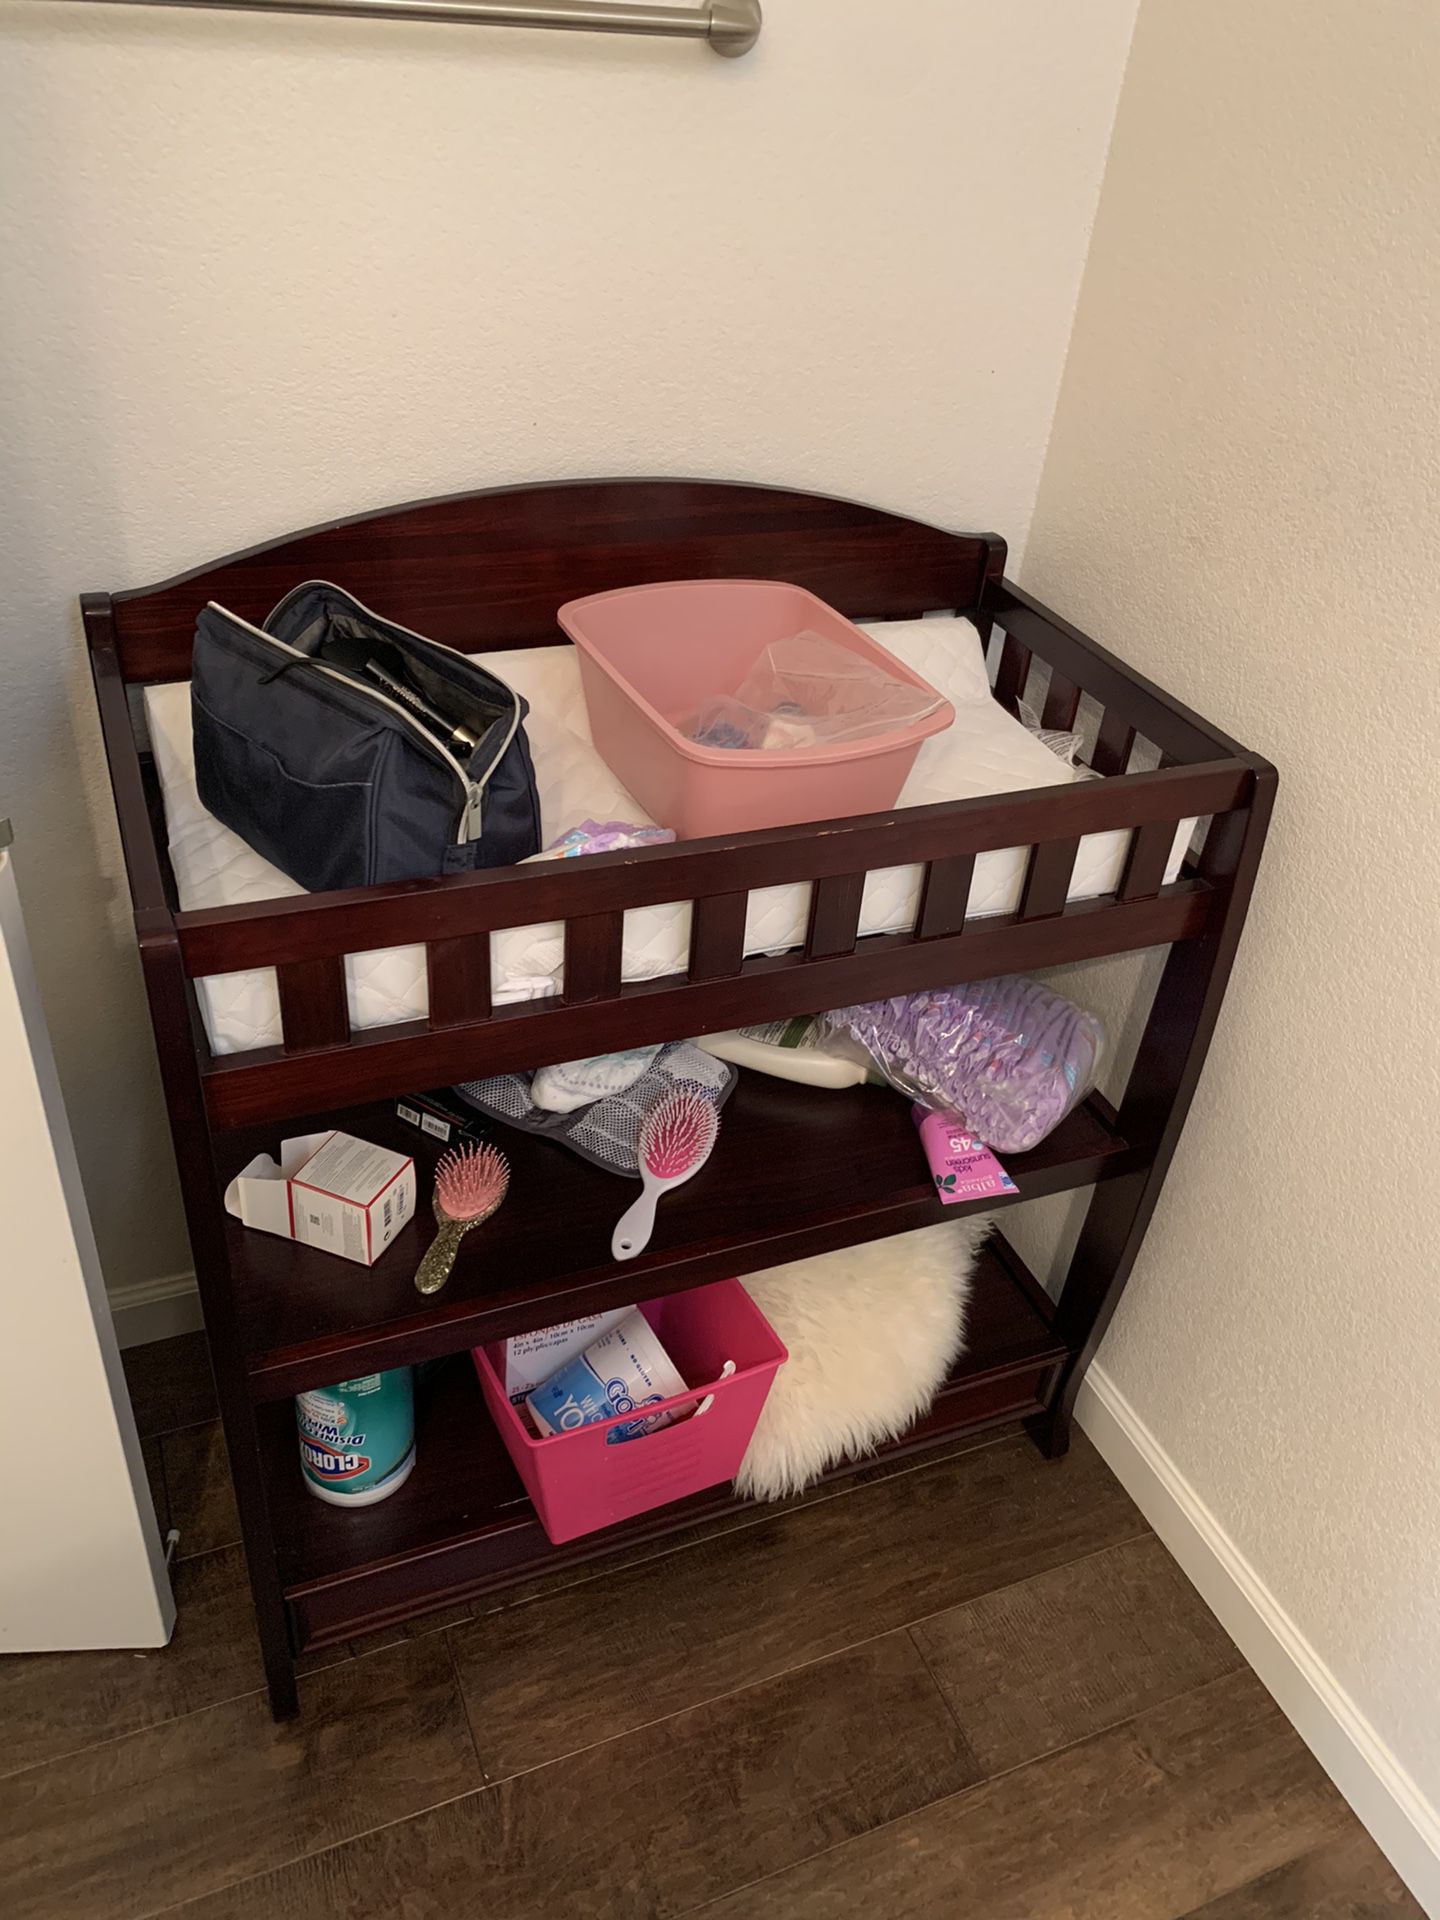 Baby diaper changing table